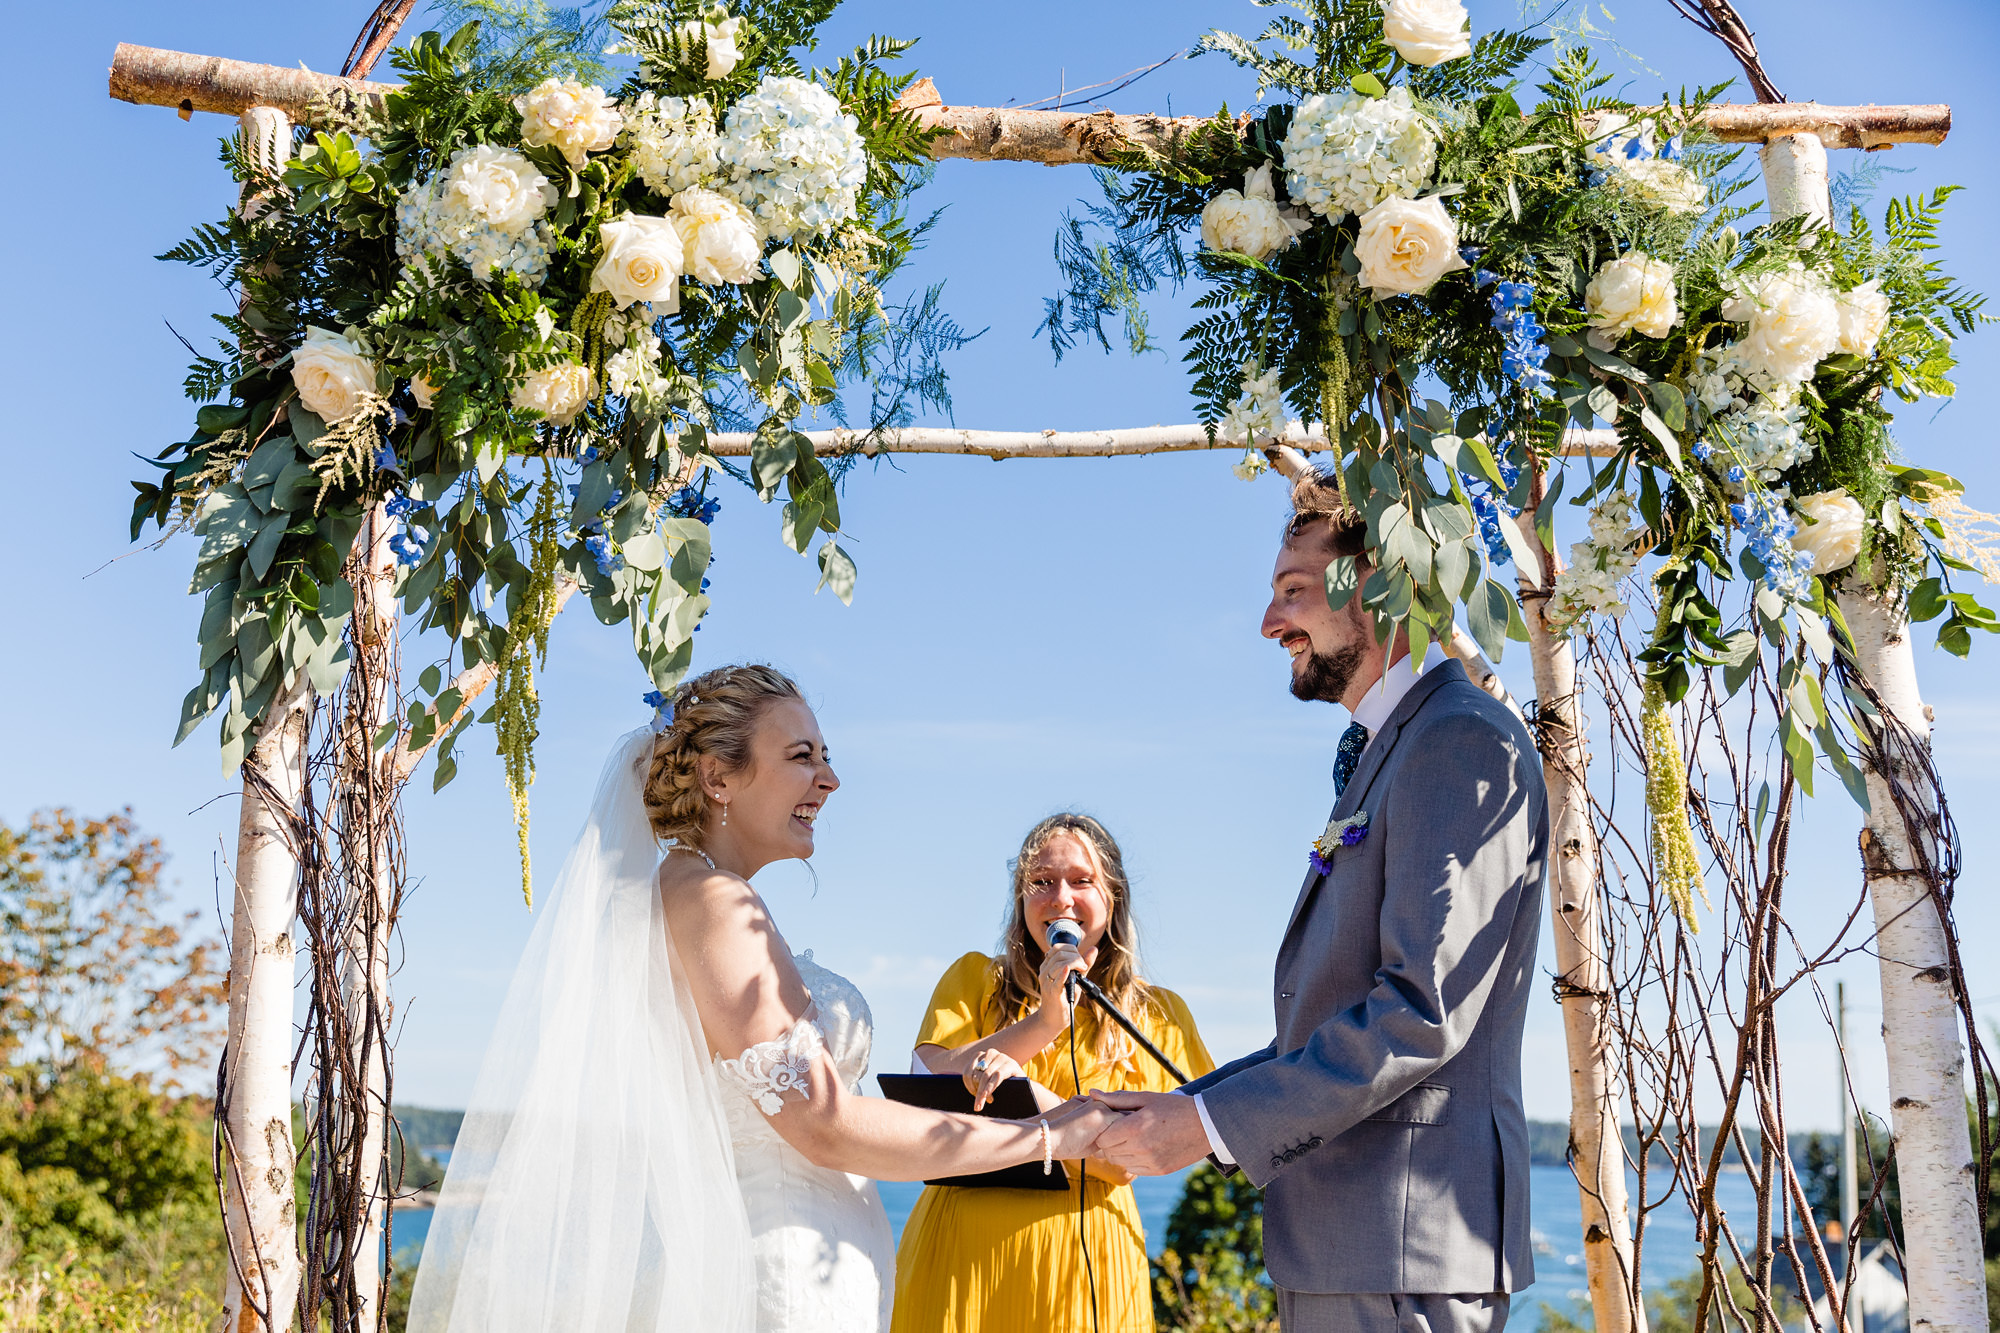 A beautiful wedding ceremony at a private residence on Swans Island, Maine